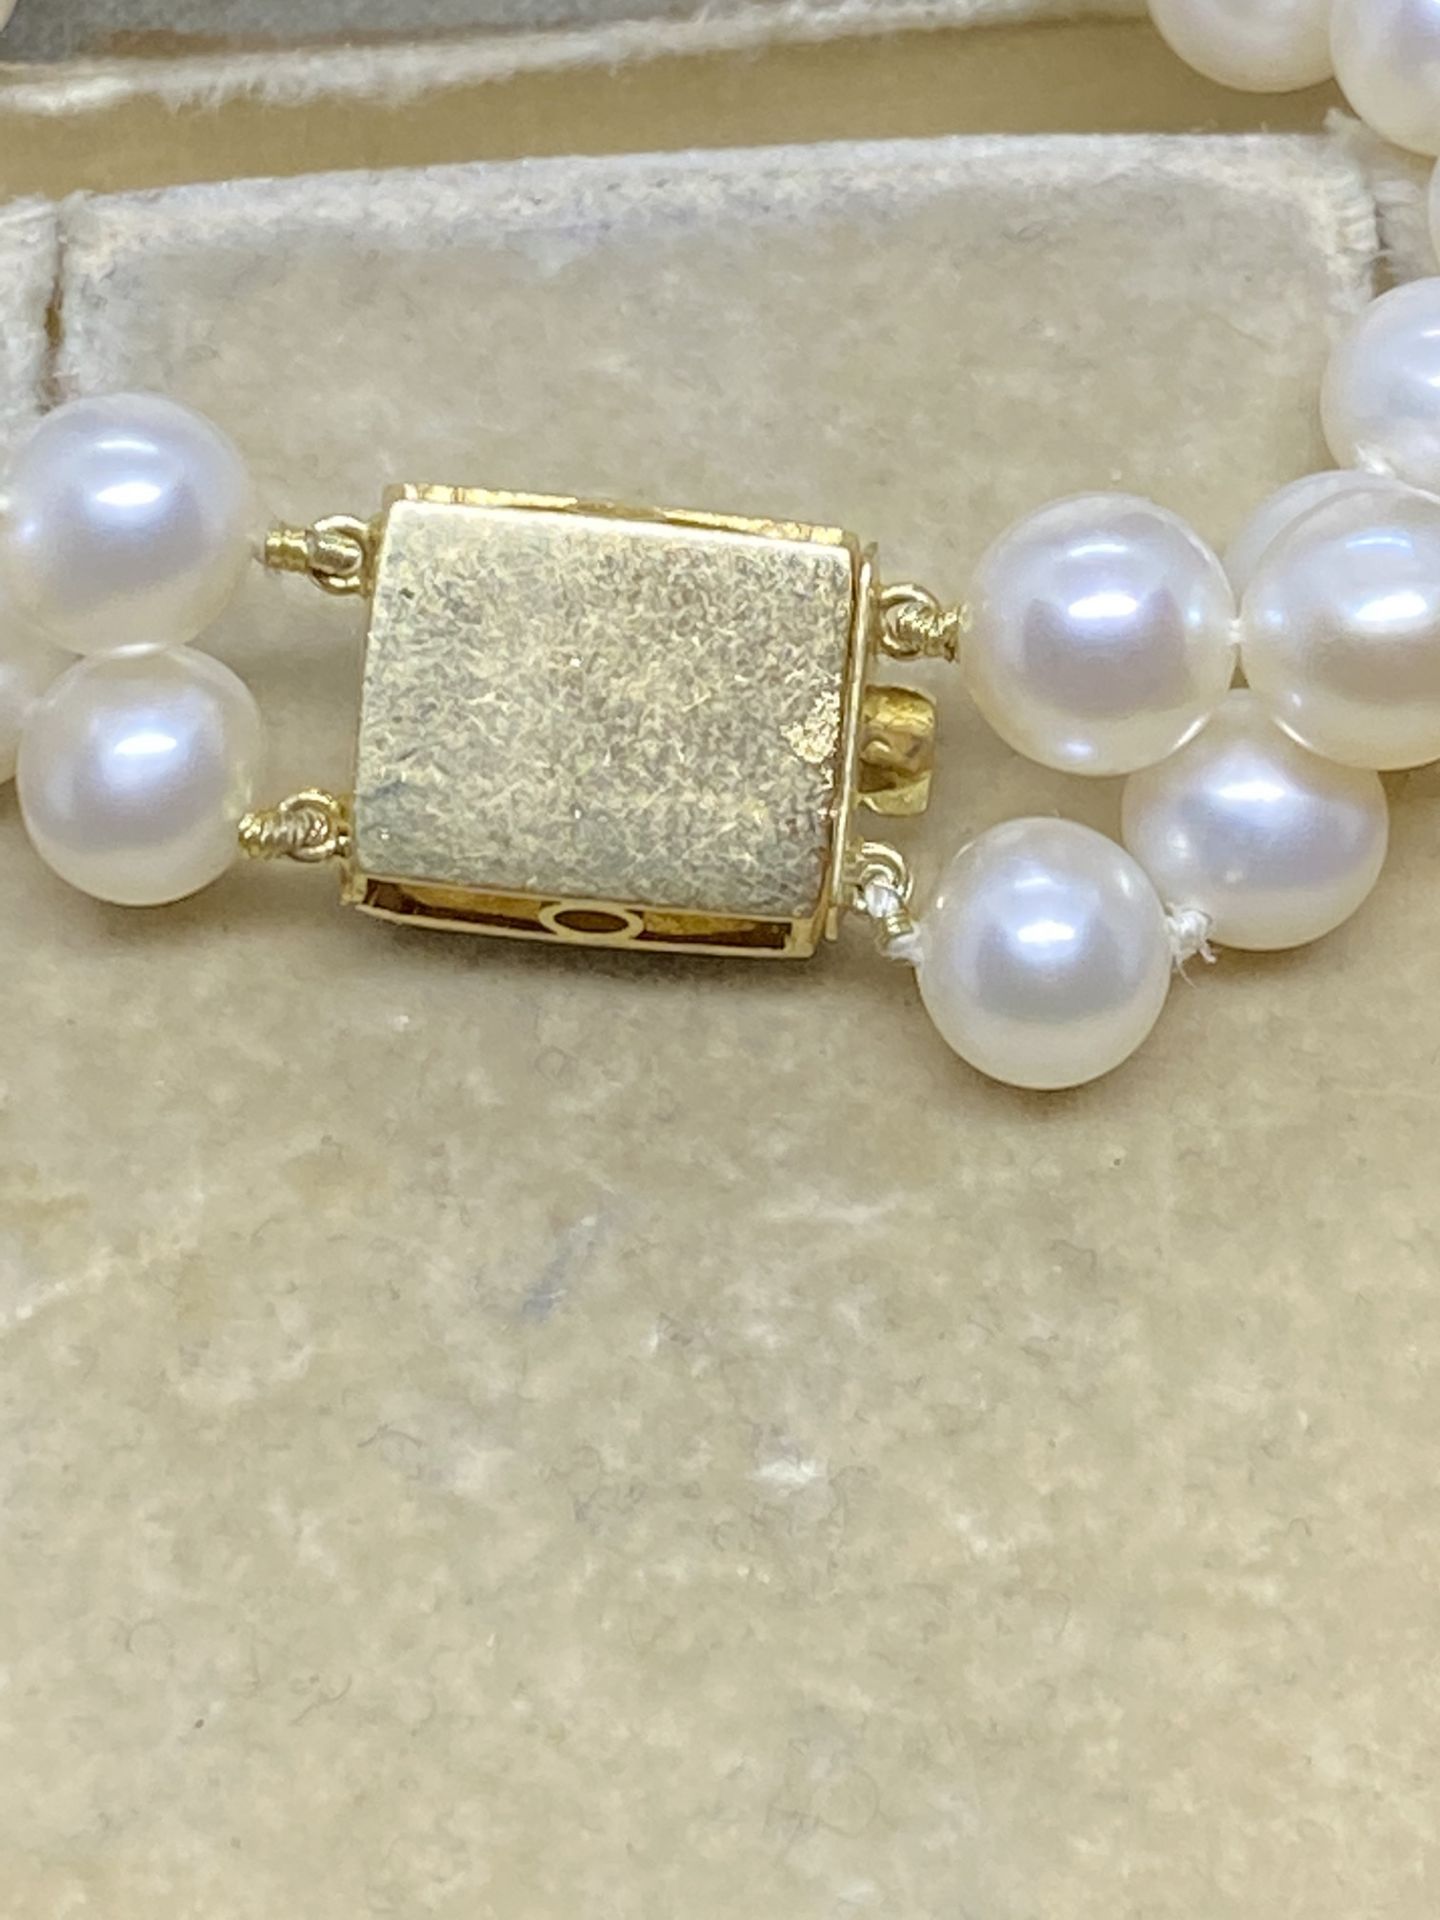 CULTURED PEARL NECKLACE WITH 18ct GOLD CLASP - Image 5 of 6